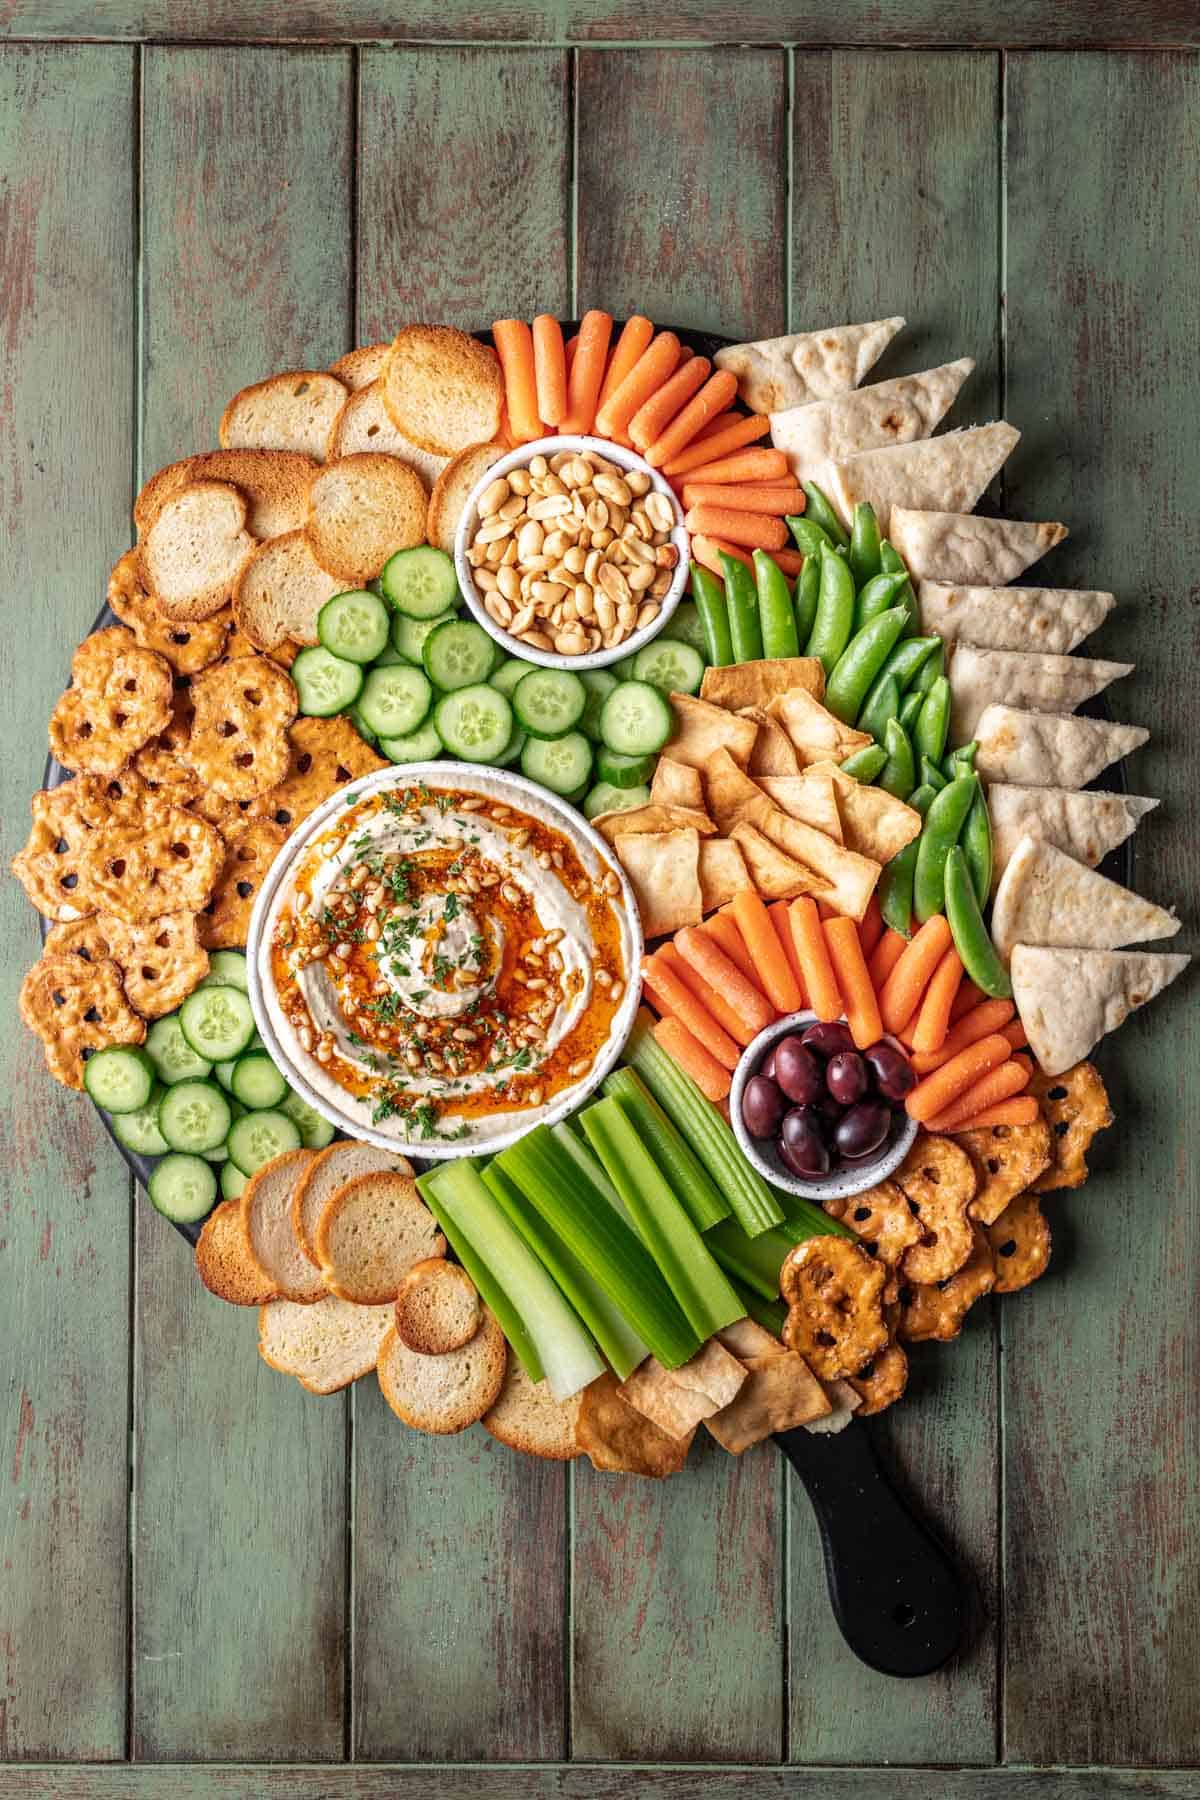 A large snack tray with hummus, vegetables, nuts, olives, and chips.